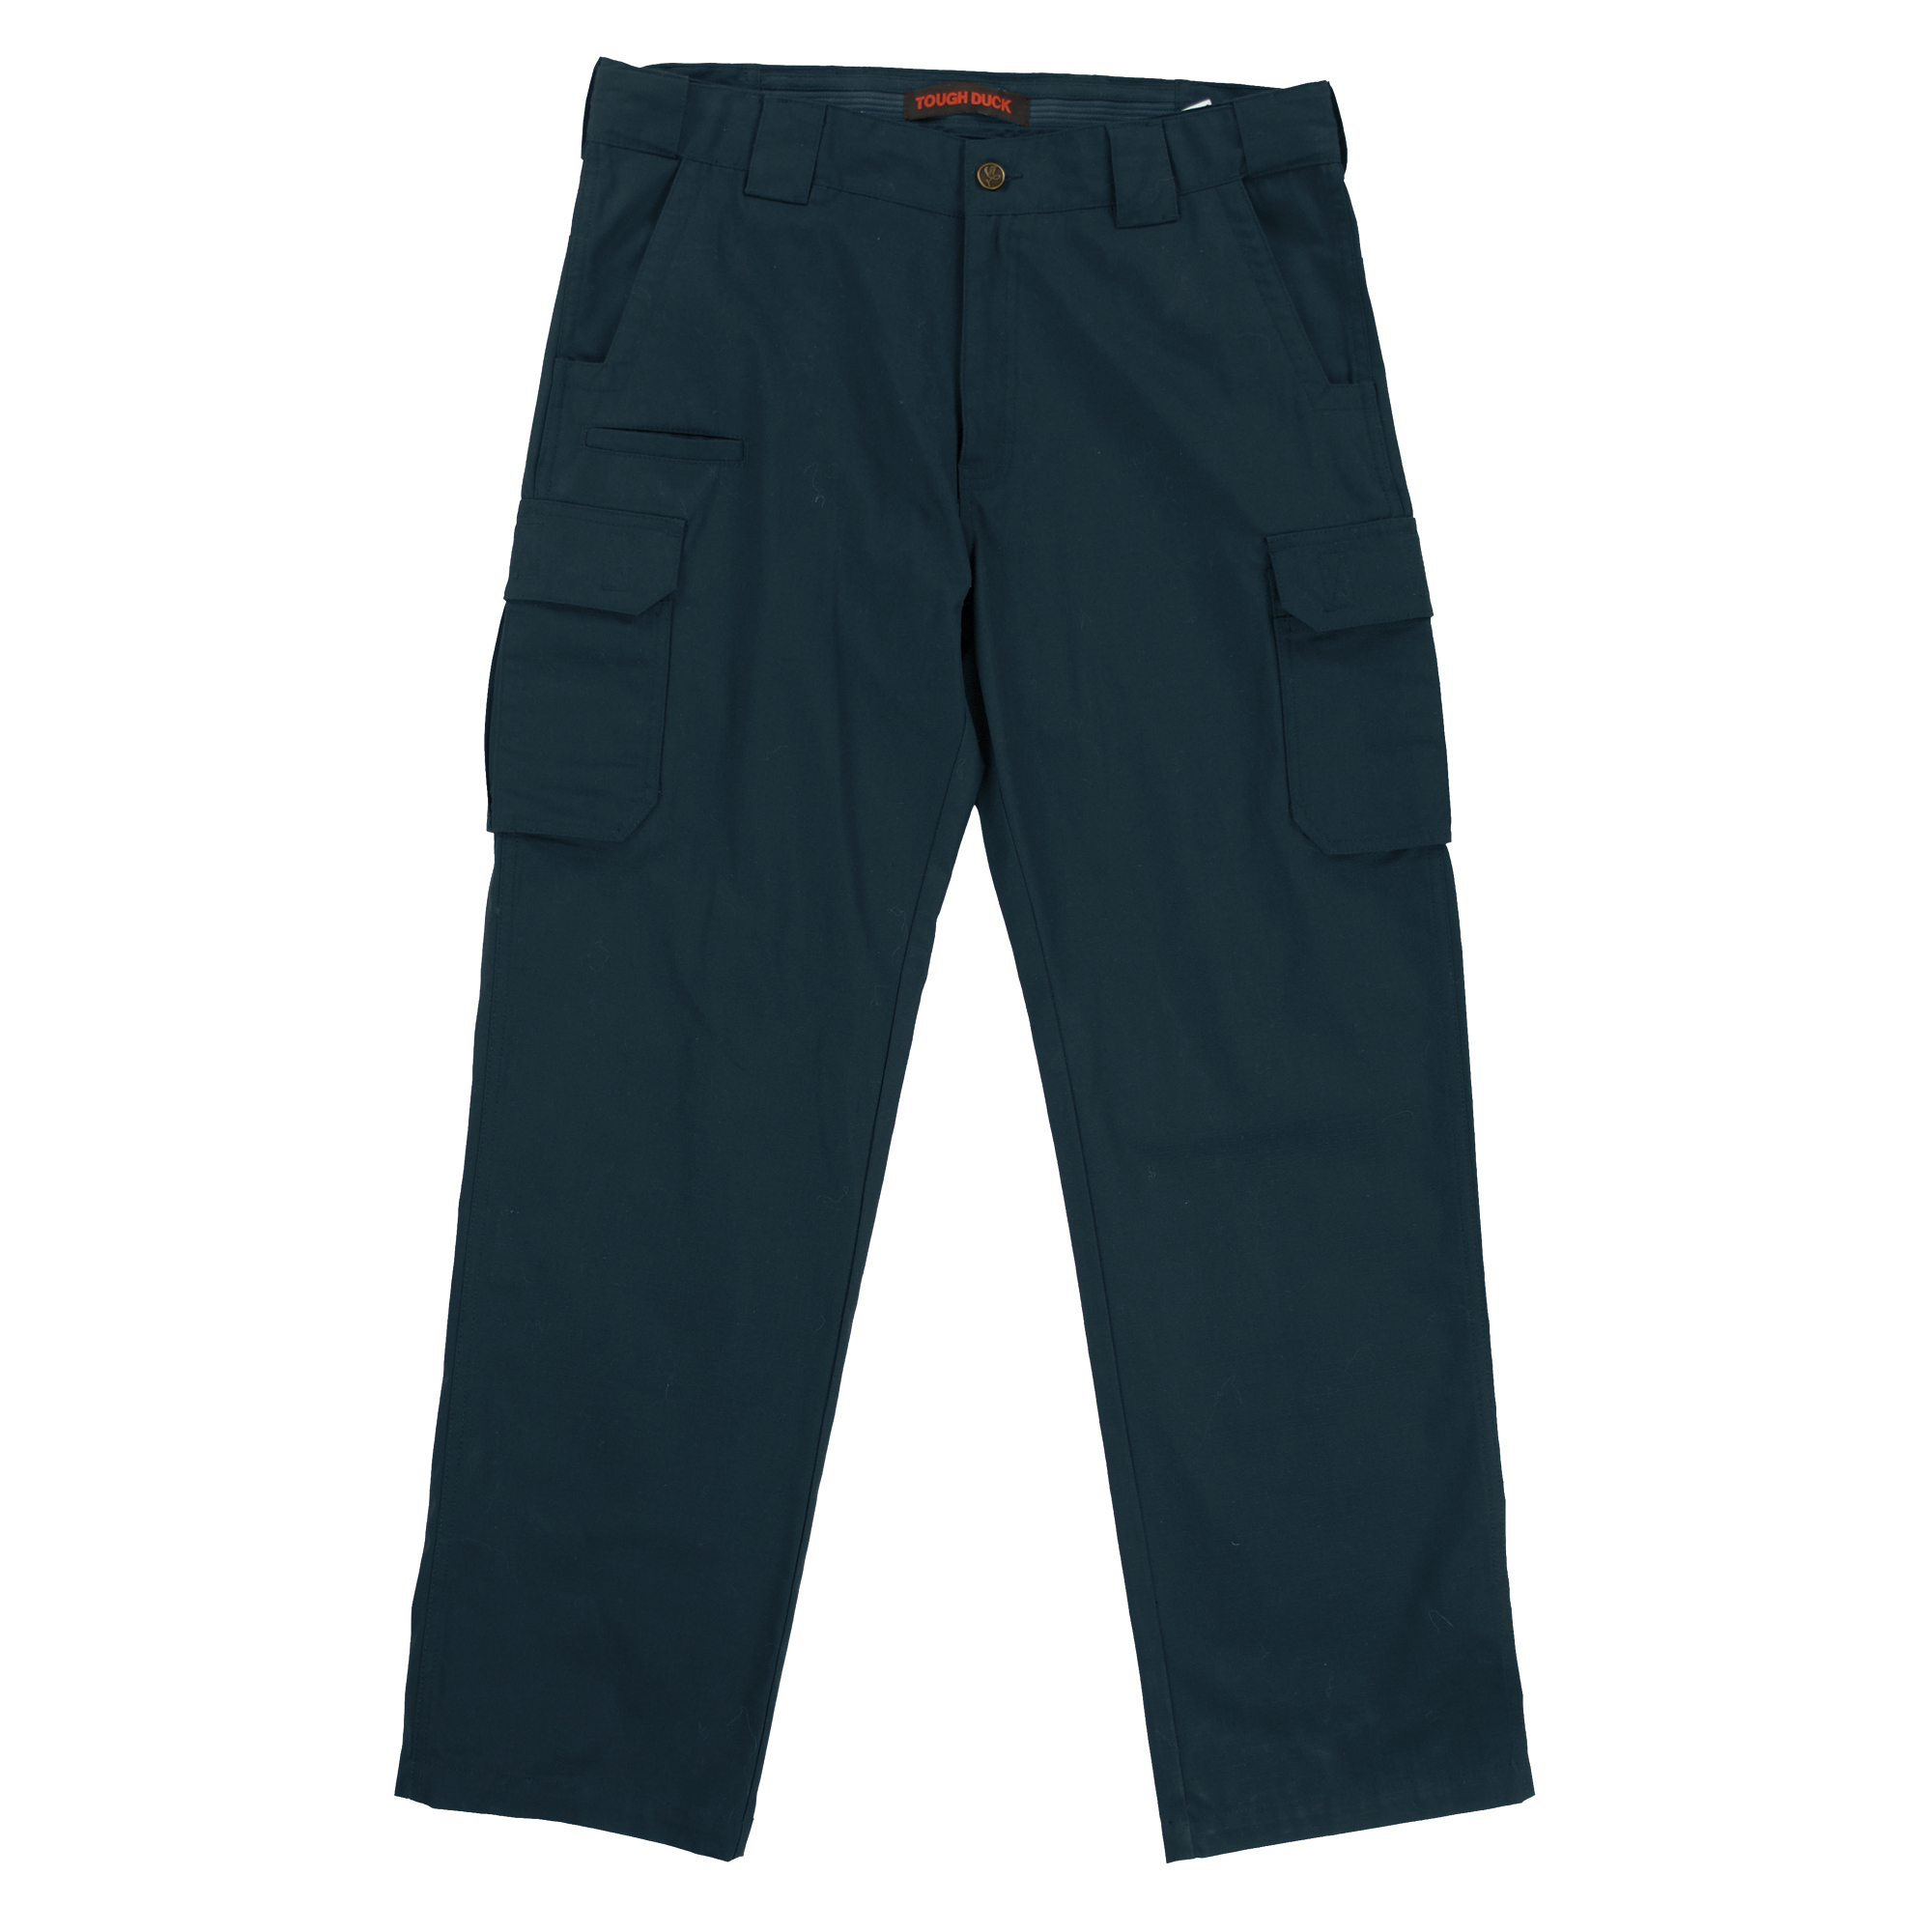 Tough Duck, Ripstop Cargo Pant, Waist 50 in, Inseam 32 in, Color Navy, Model WP111